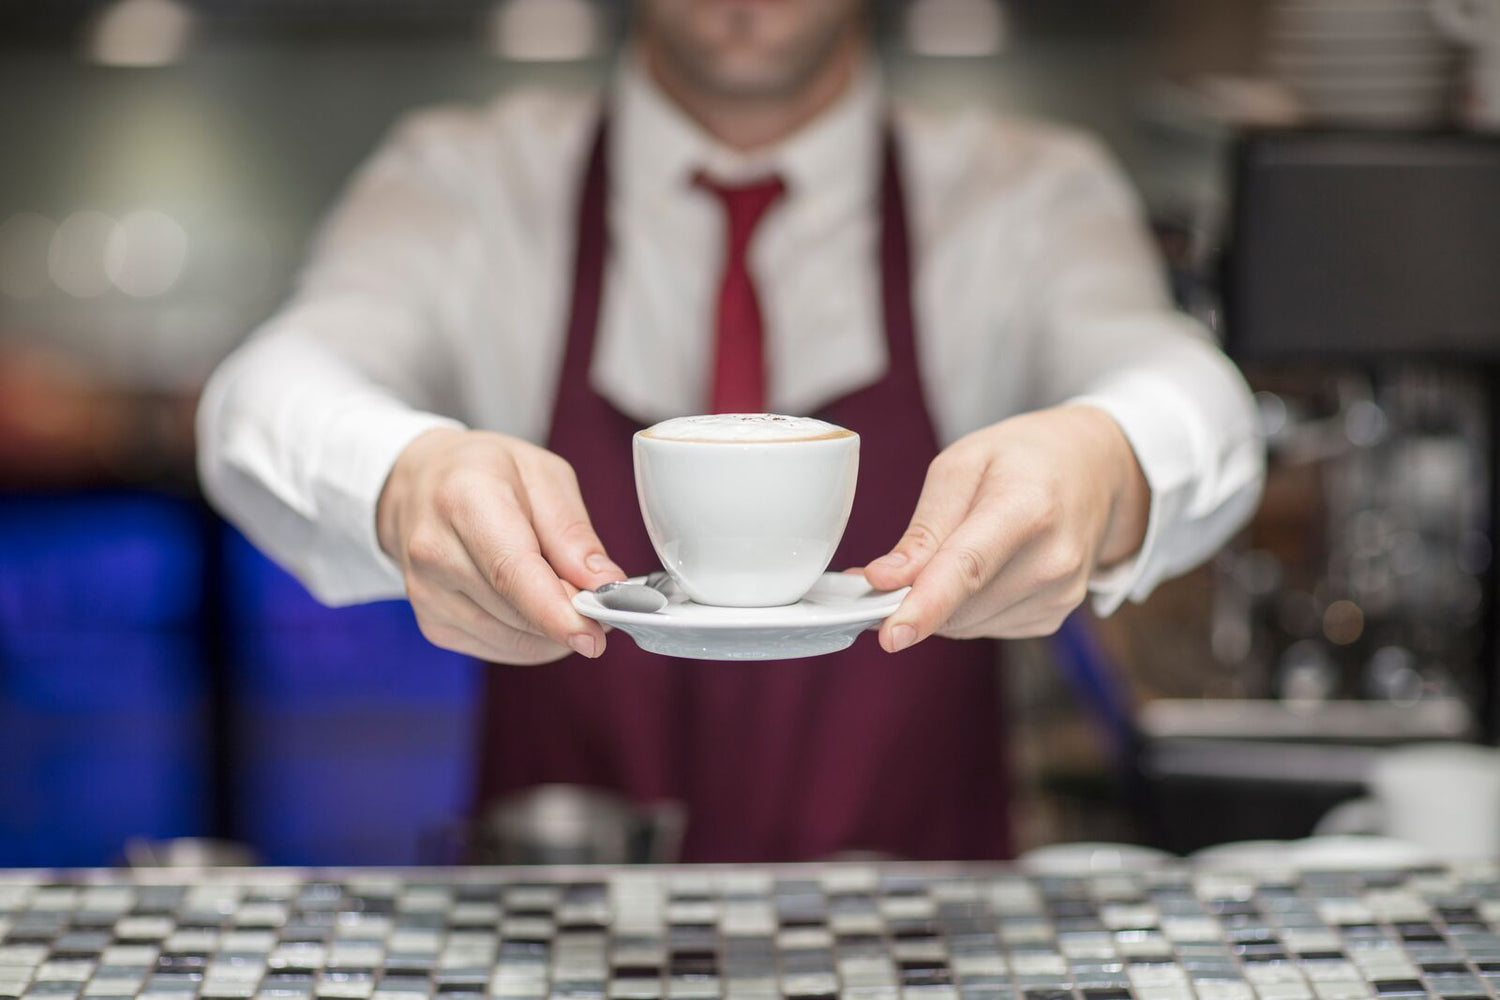 waiter serving a cup of coffee